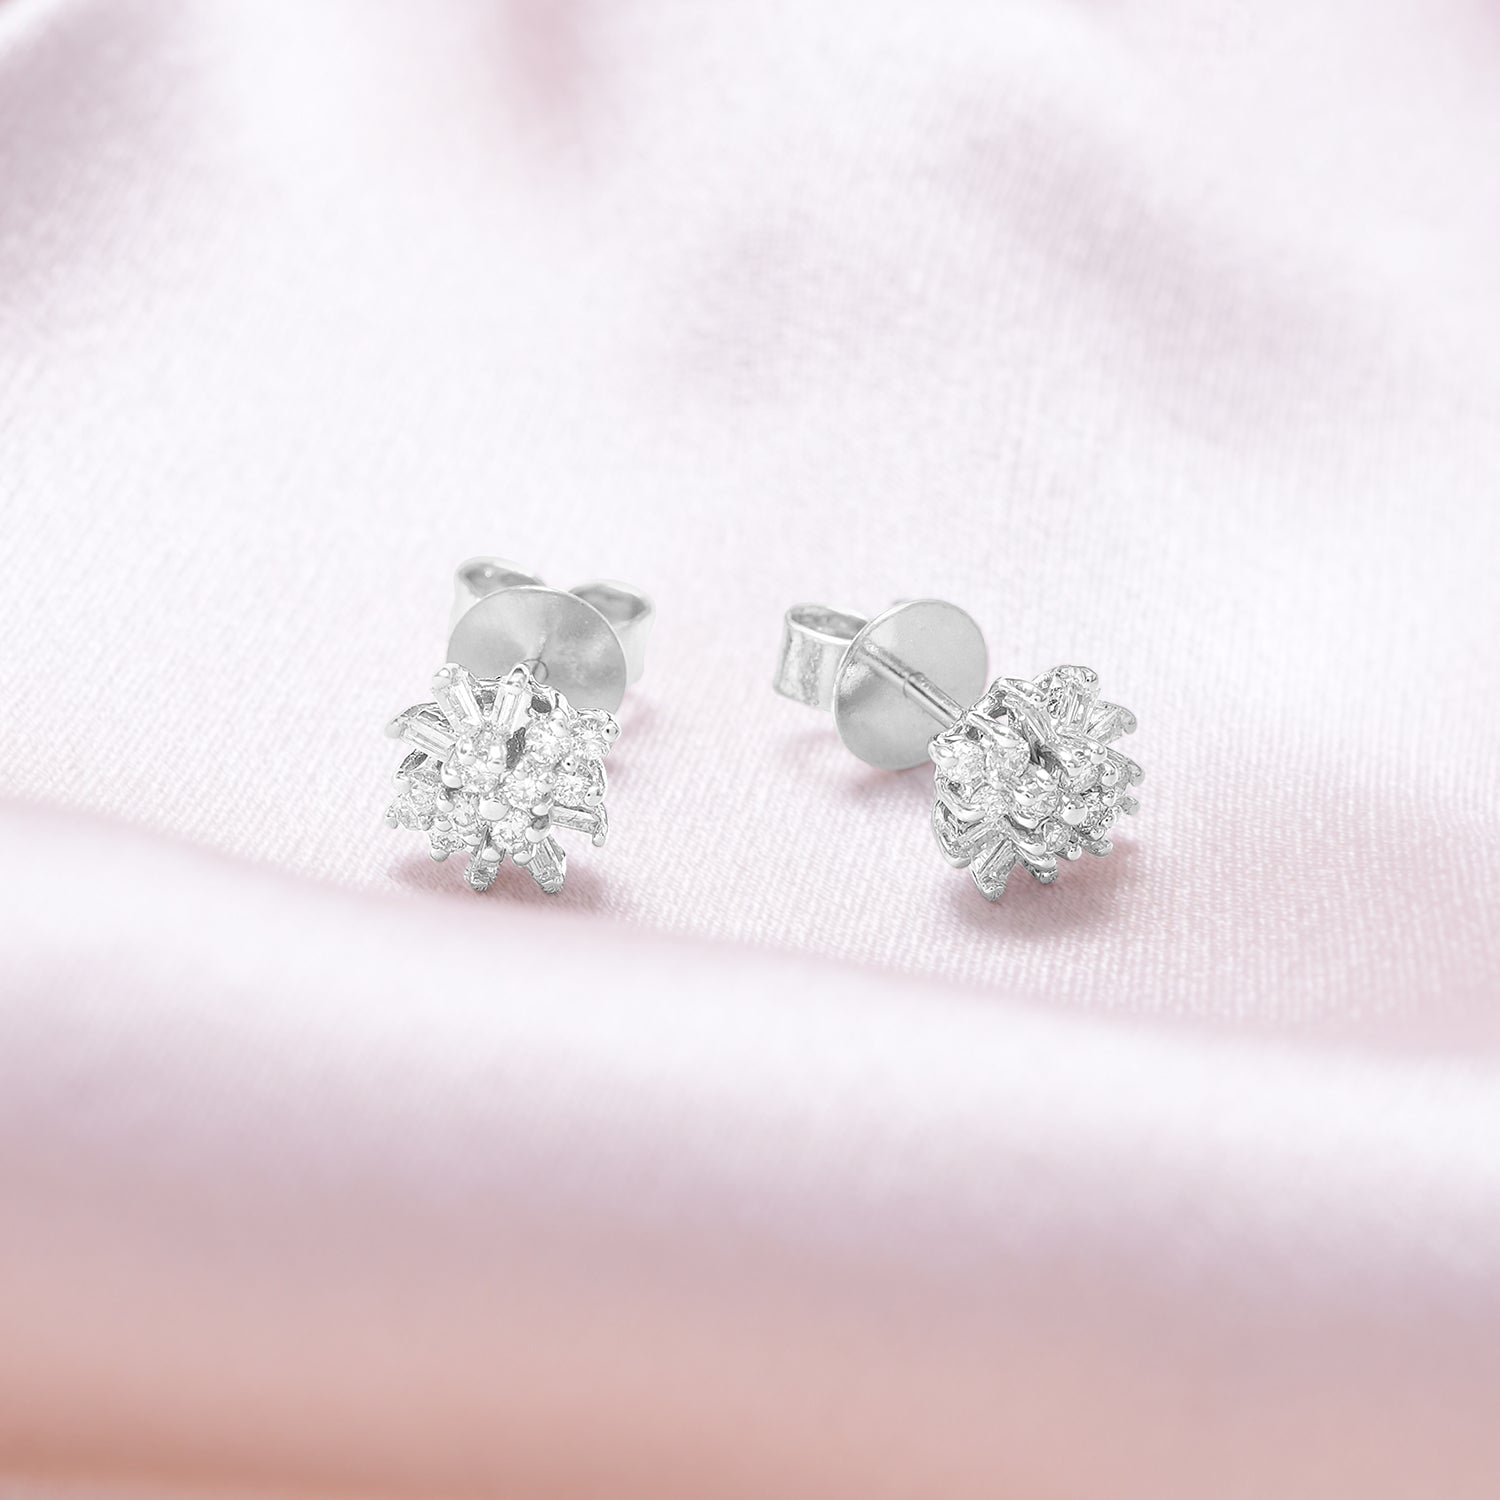 Scattered flower earrings with Diamonds